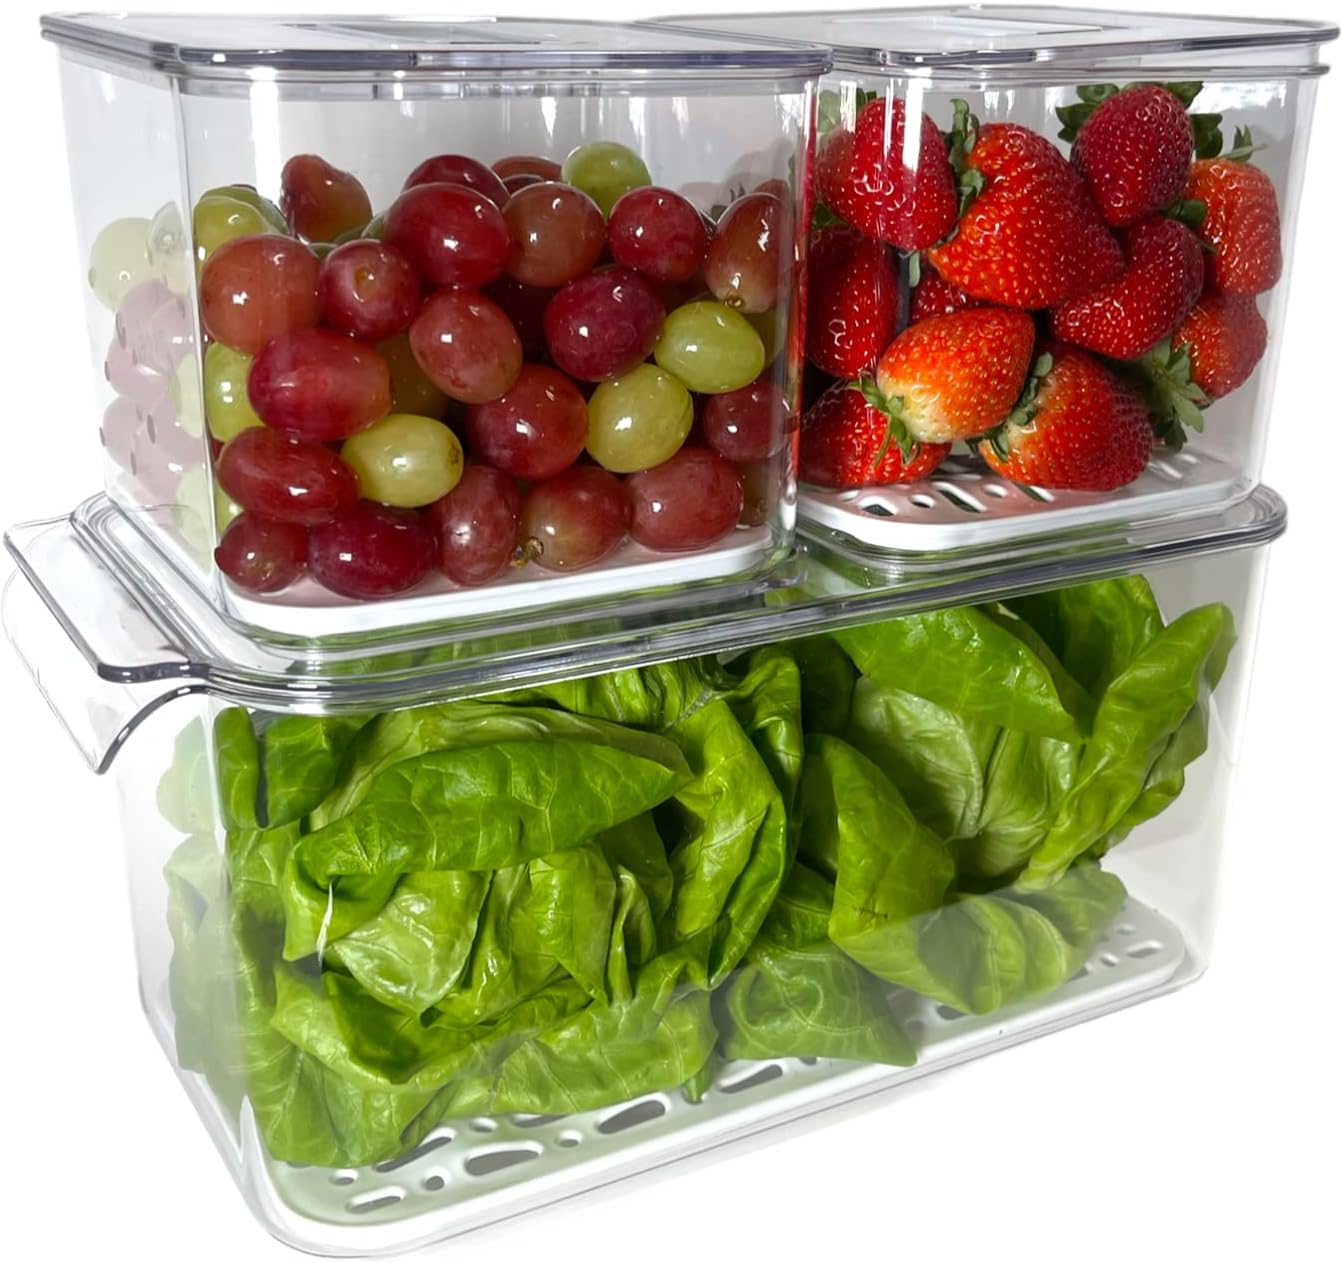 3 Pcs Plastic Refrigerator Food Storage Containers - Clear Organizer Bins W/Removable Drain Tray, Stackable Vented Lids, Fruit & Vegetables Fridge Organizers & Storage Clear for Pantry & Freezer